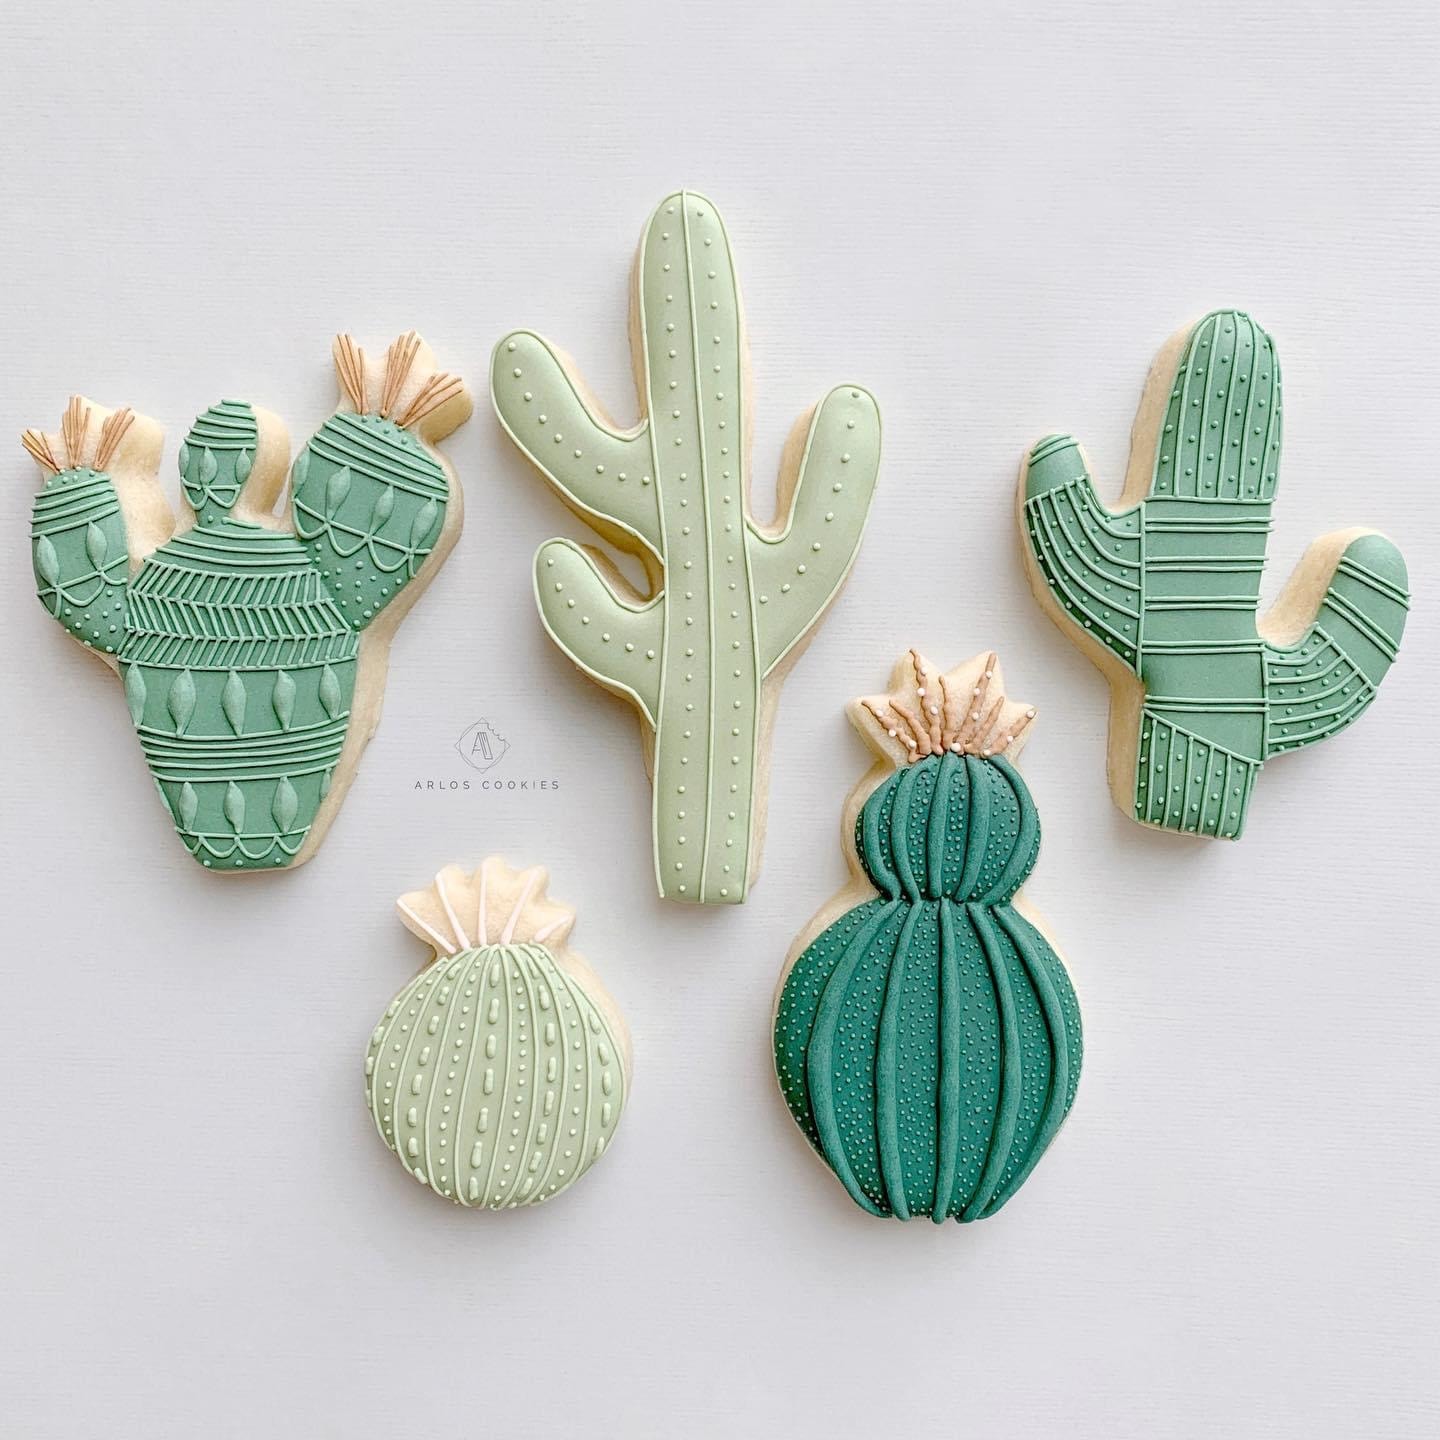 Five cactus-shaped cookies in various shades of green.